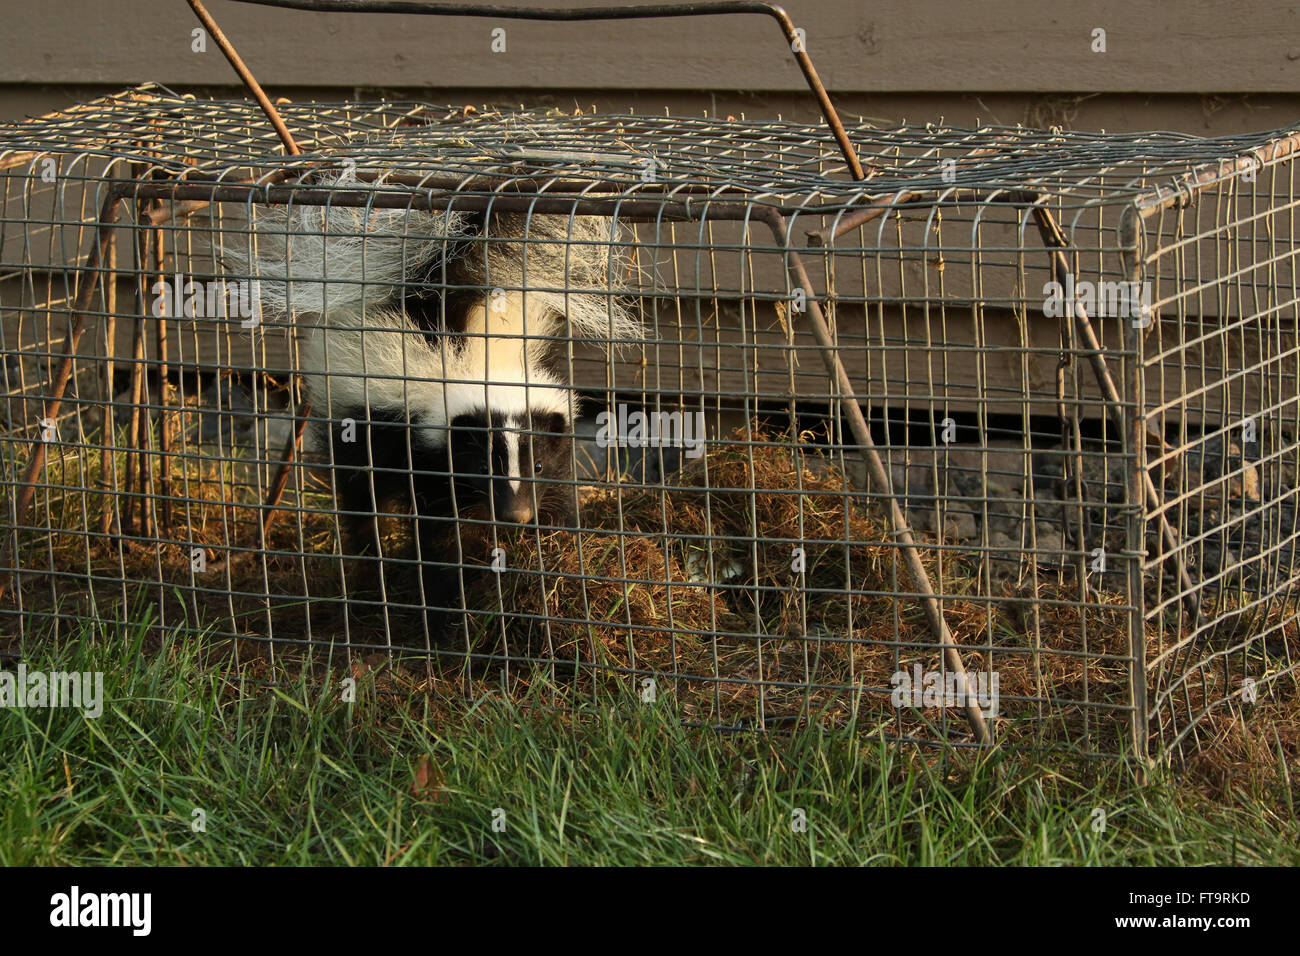 https://c8.alamy.com/comp/FT9RKD/young-skunk-in-live-trap-residential-neighborhood-nuisance-animal-FT9RKD.jpg